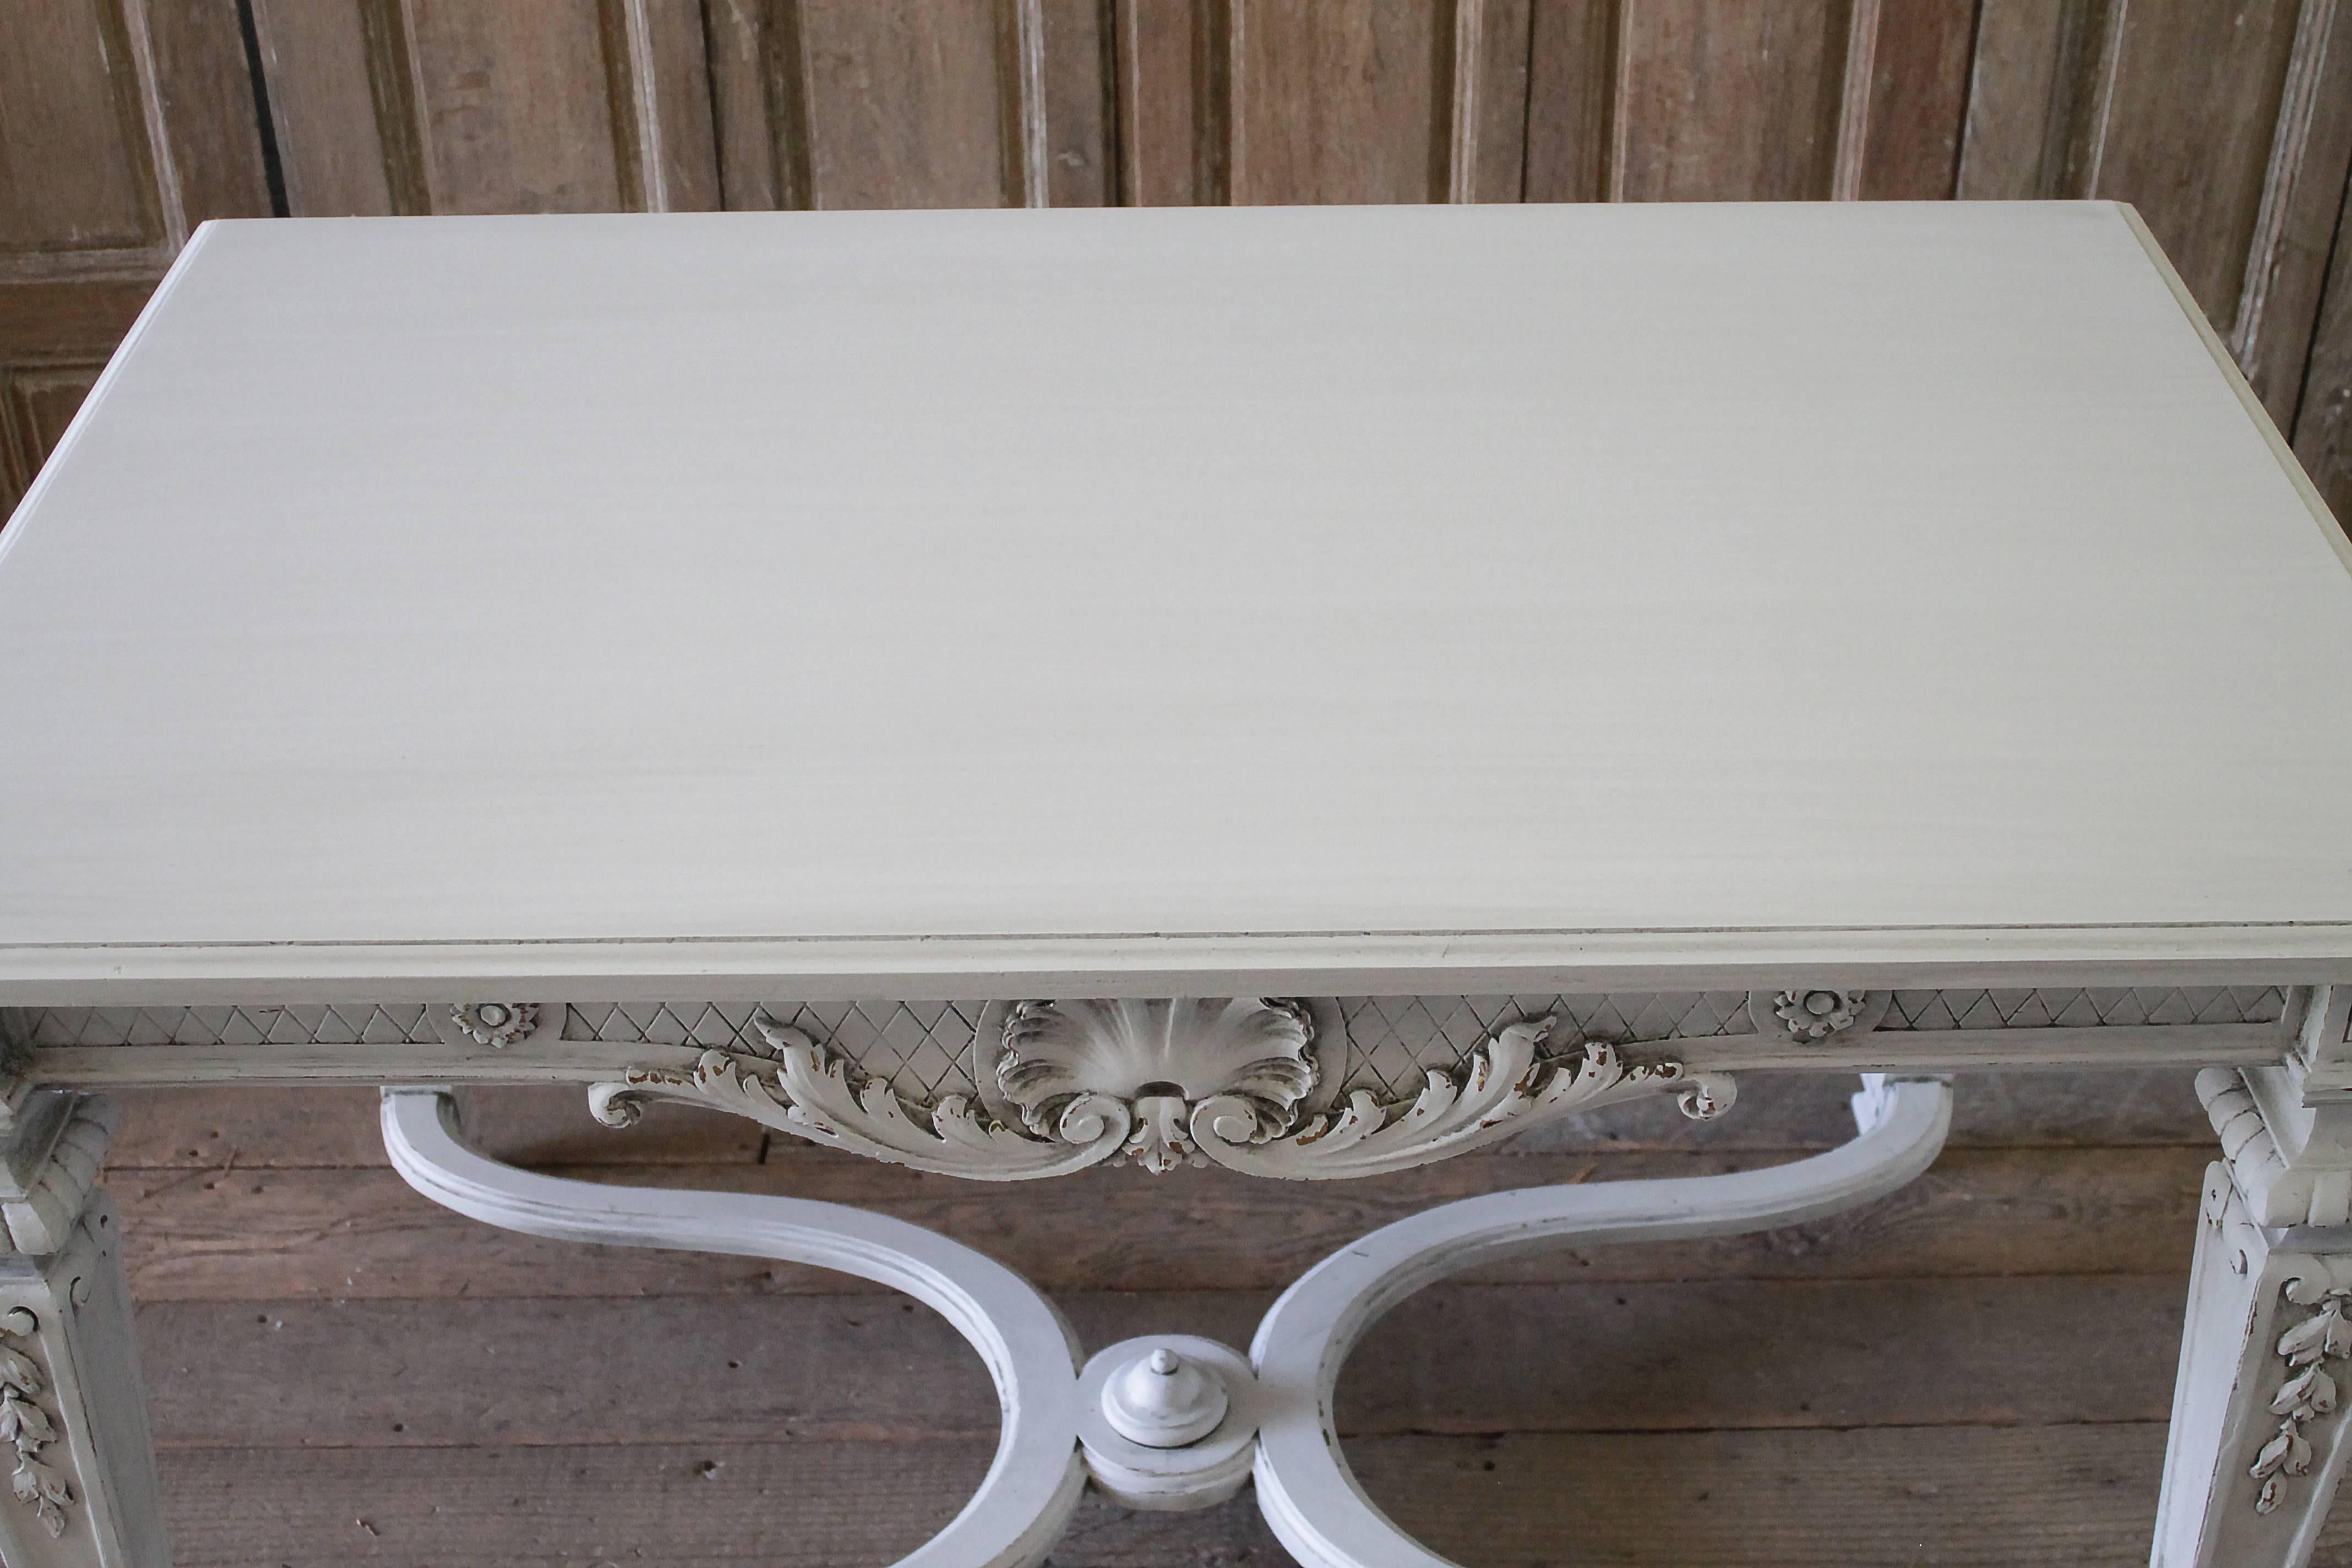 20th century carved and painted neoclassical style centre table
Paint finish is new in a soft oyster white finish, subtle distressed edges, and antique glazed patina.
Table is strong and sturdy, ready for everyday use.
Measures: 49.5